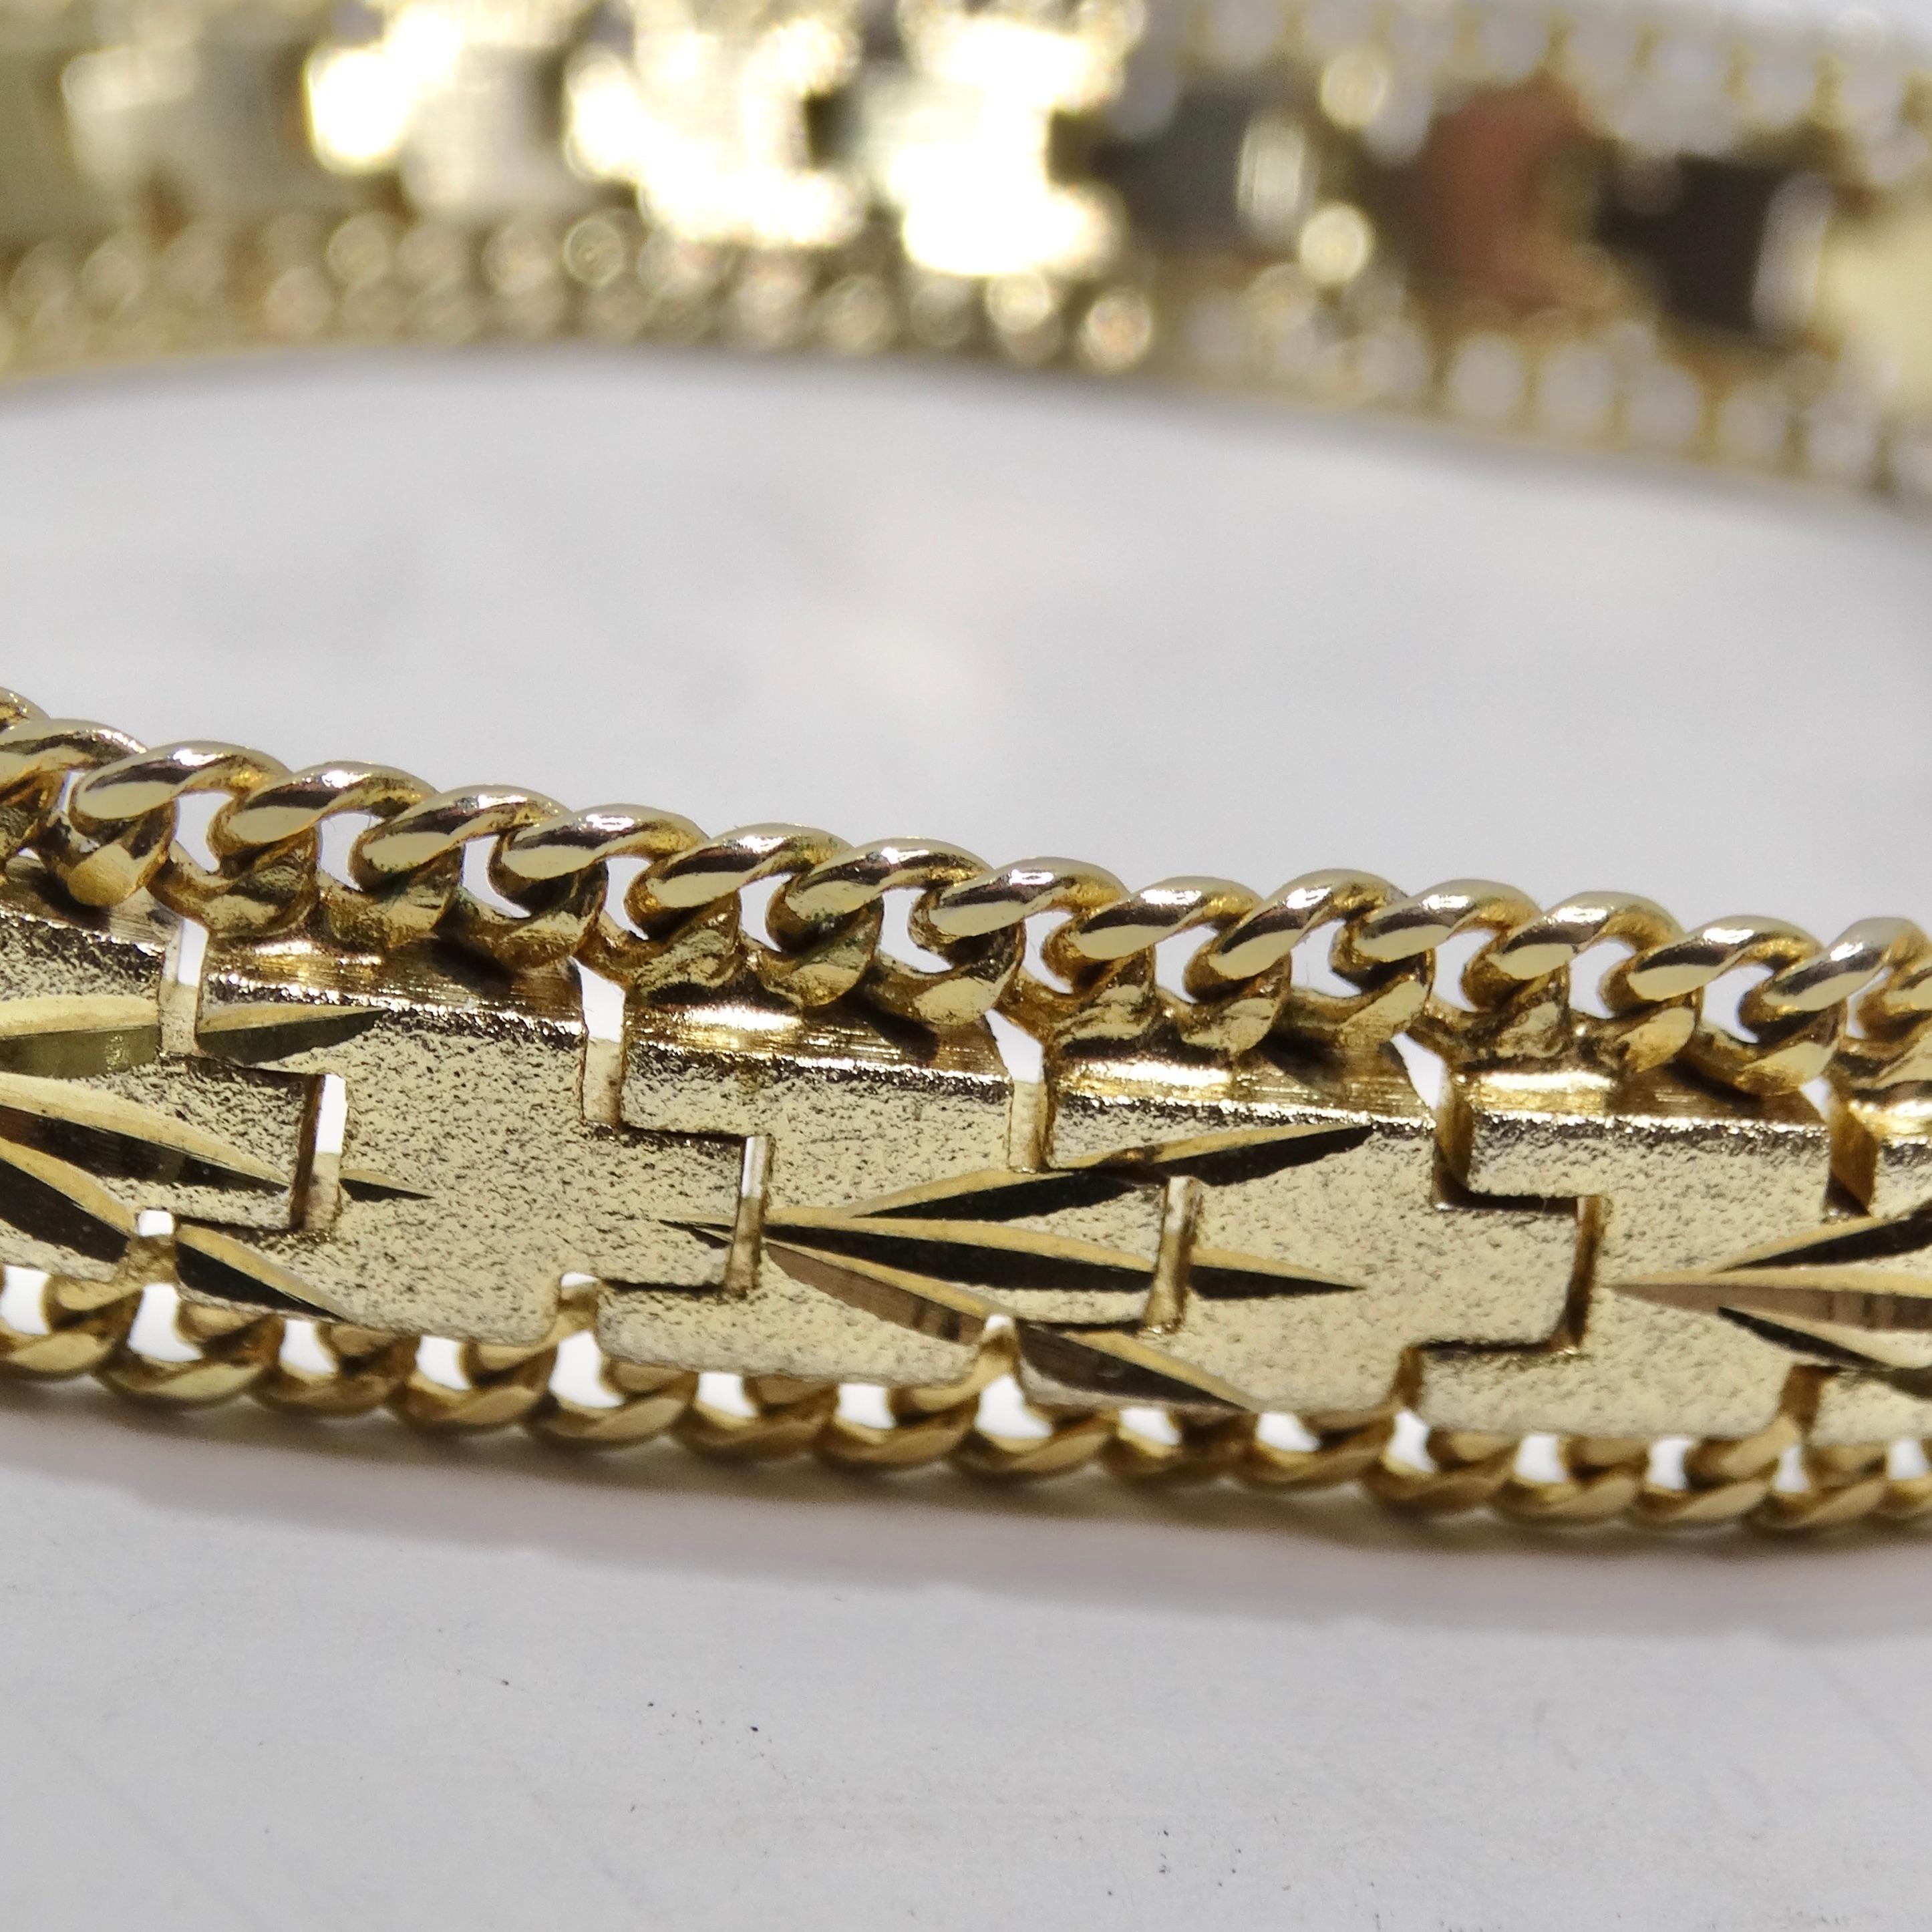 24K Gold Plated 1960s Chain Bracelet In Excellent Condition For Sale In Scottsdale, AZ